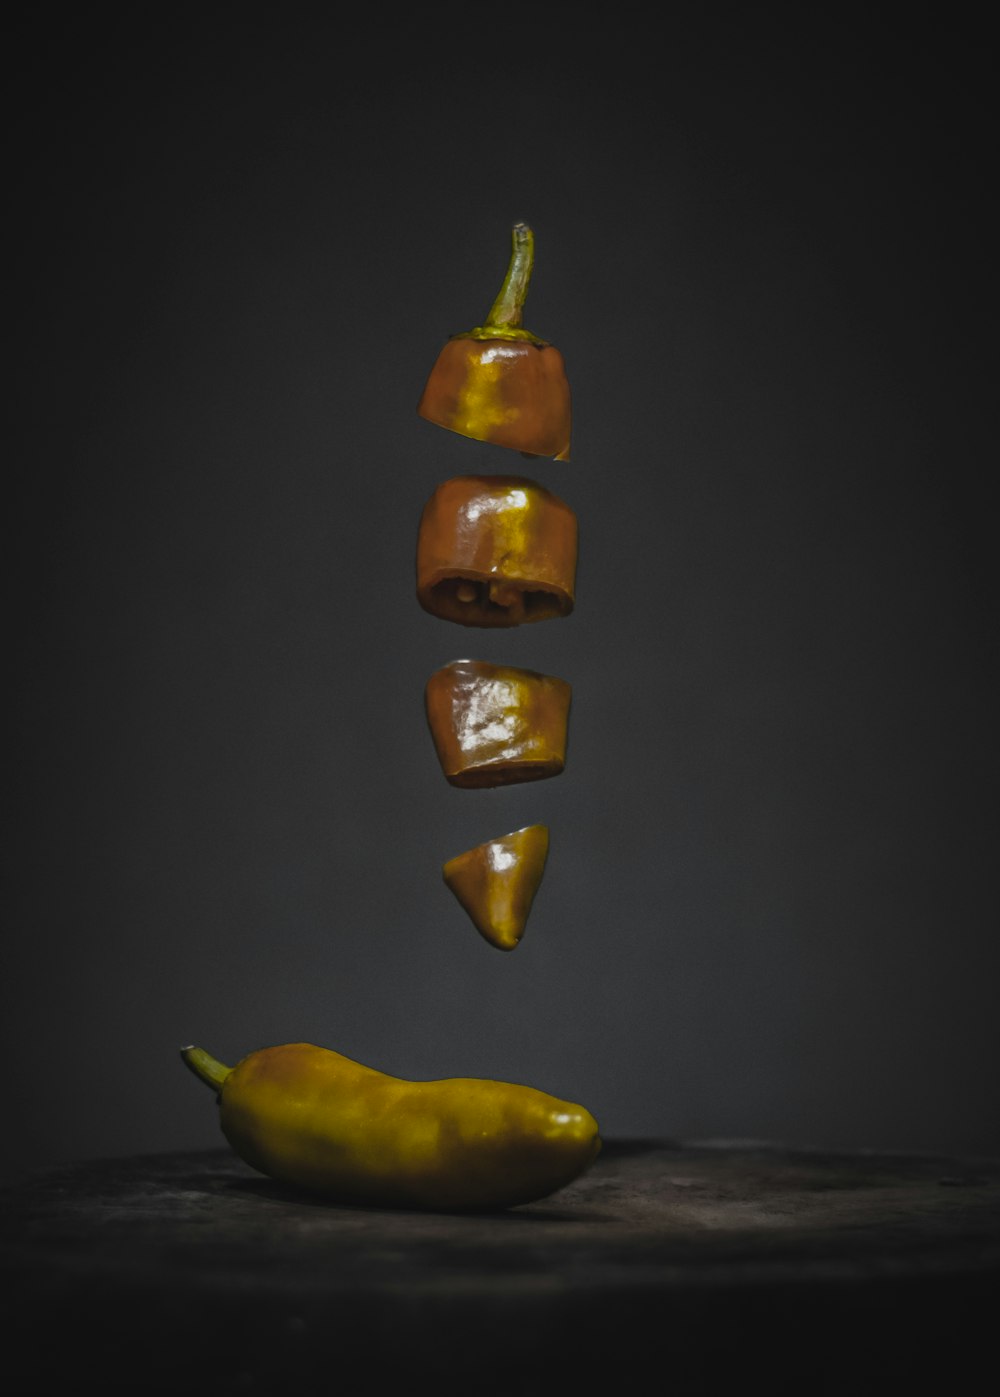 a yellow pepper falling into a pile of peppers